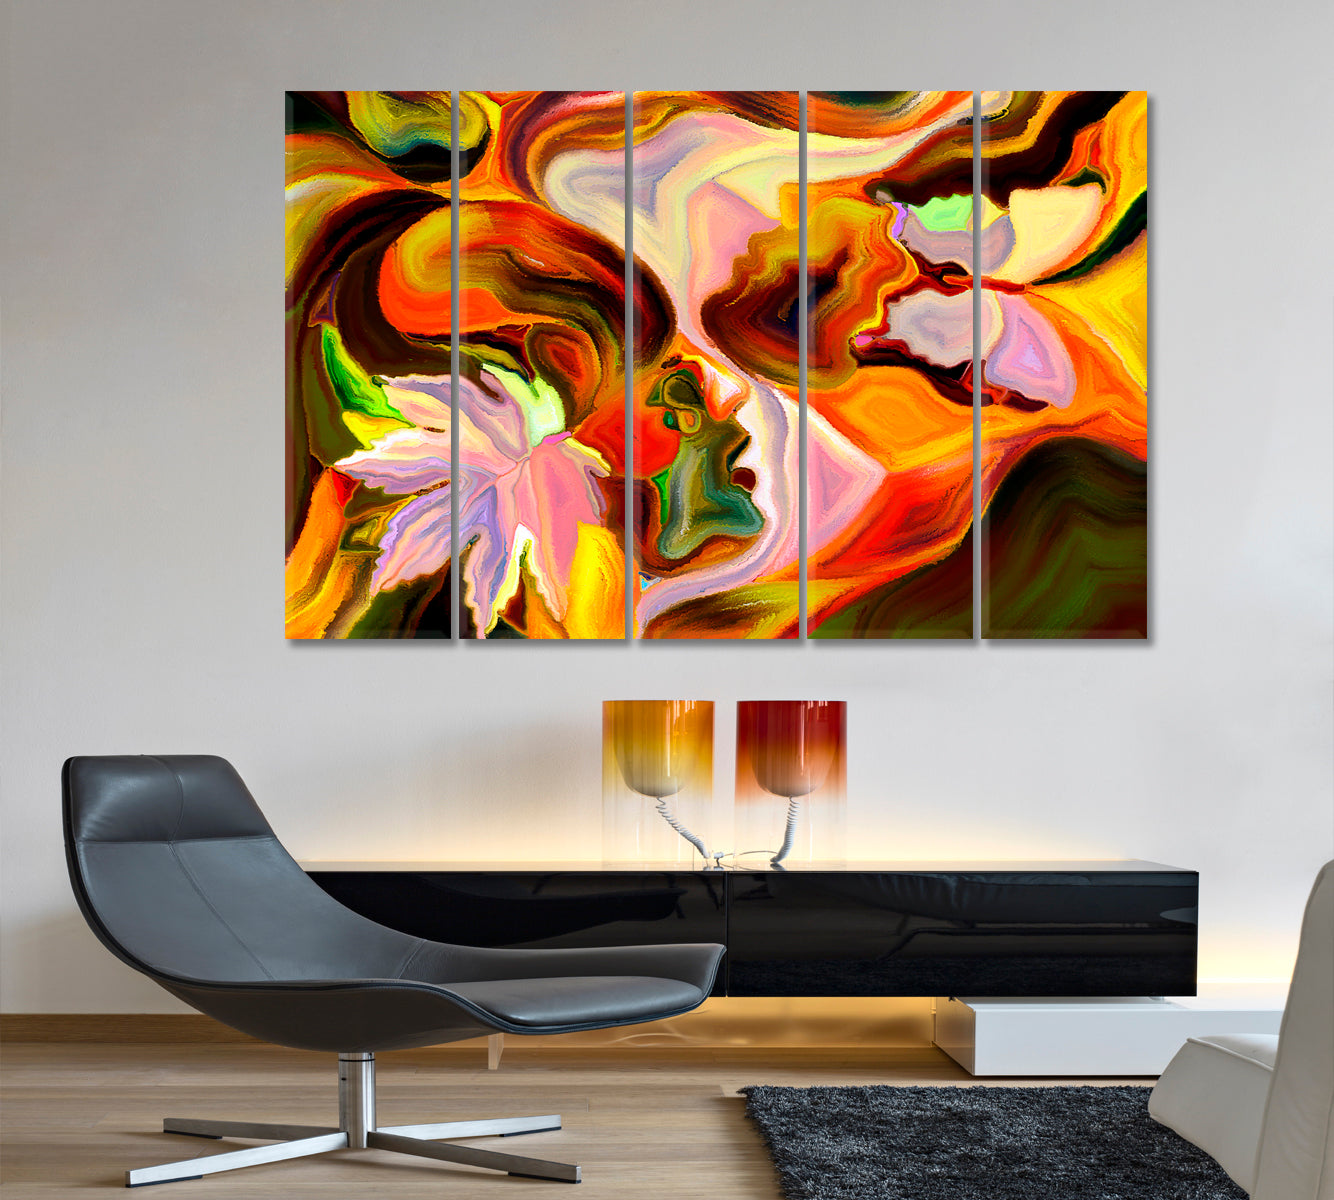 Nature of Everything.  Human autumn leaf and Butterfly Multi Color Patterns Abstract Art Print Artesty 5 panels 36" x 24" 